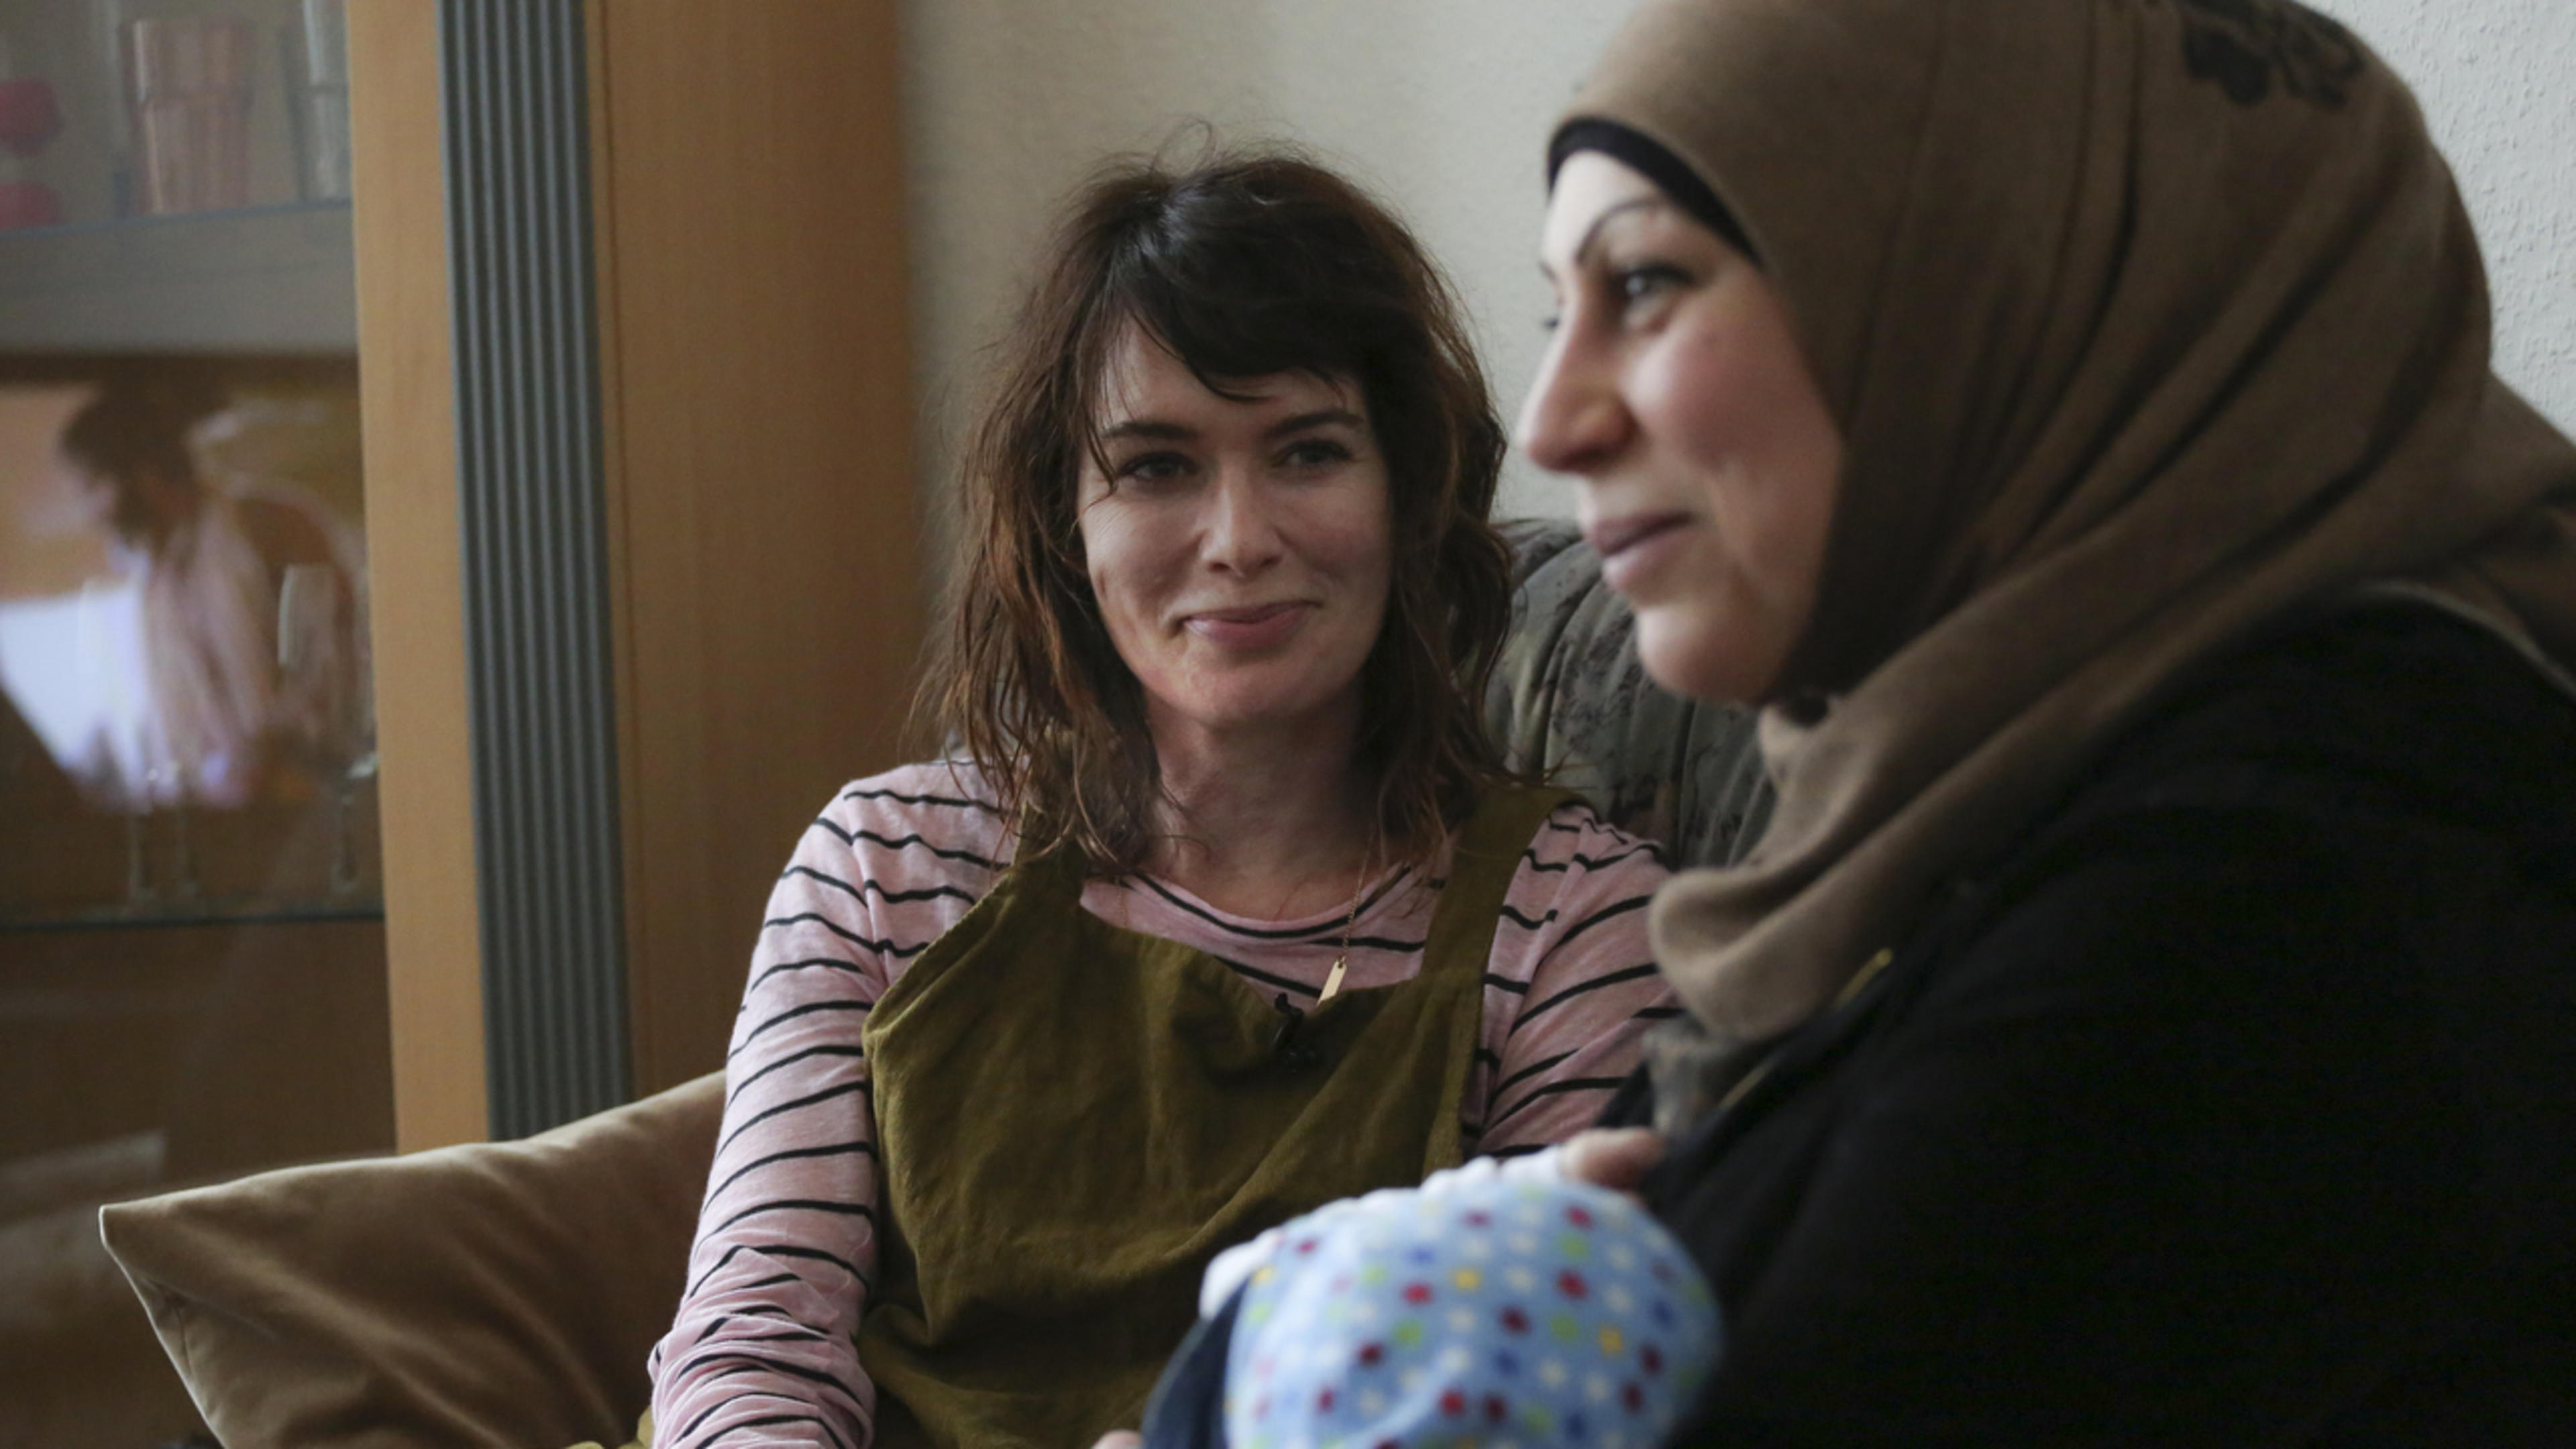 Lena Headey sits with refugees in Germany